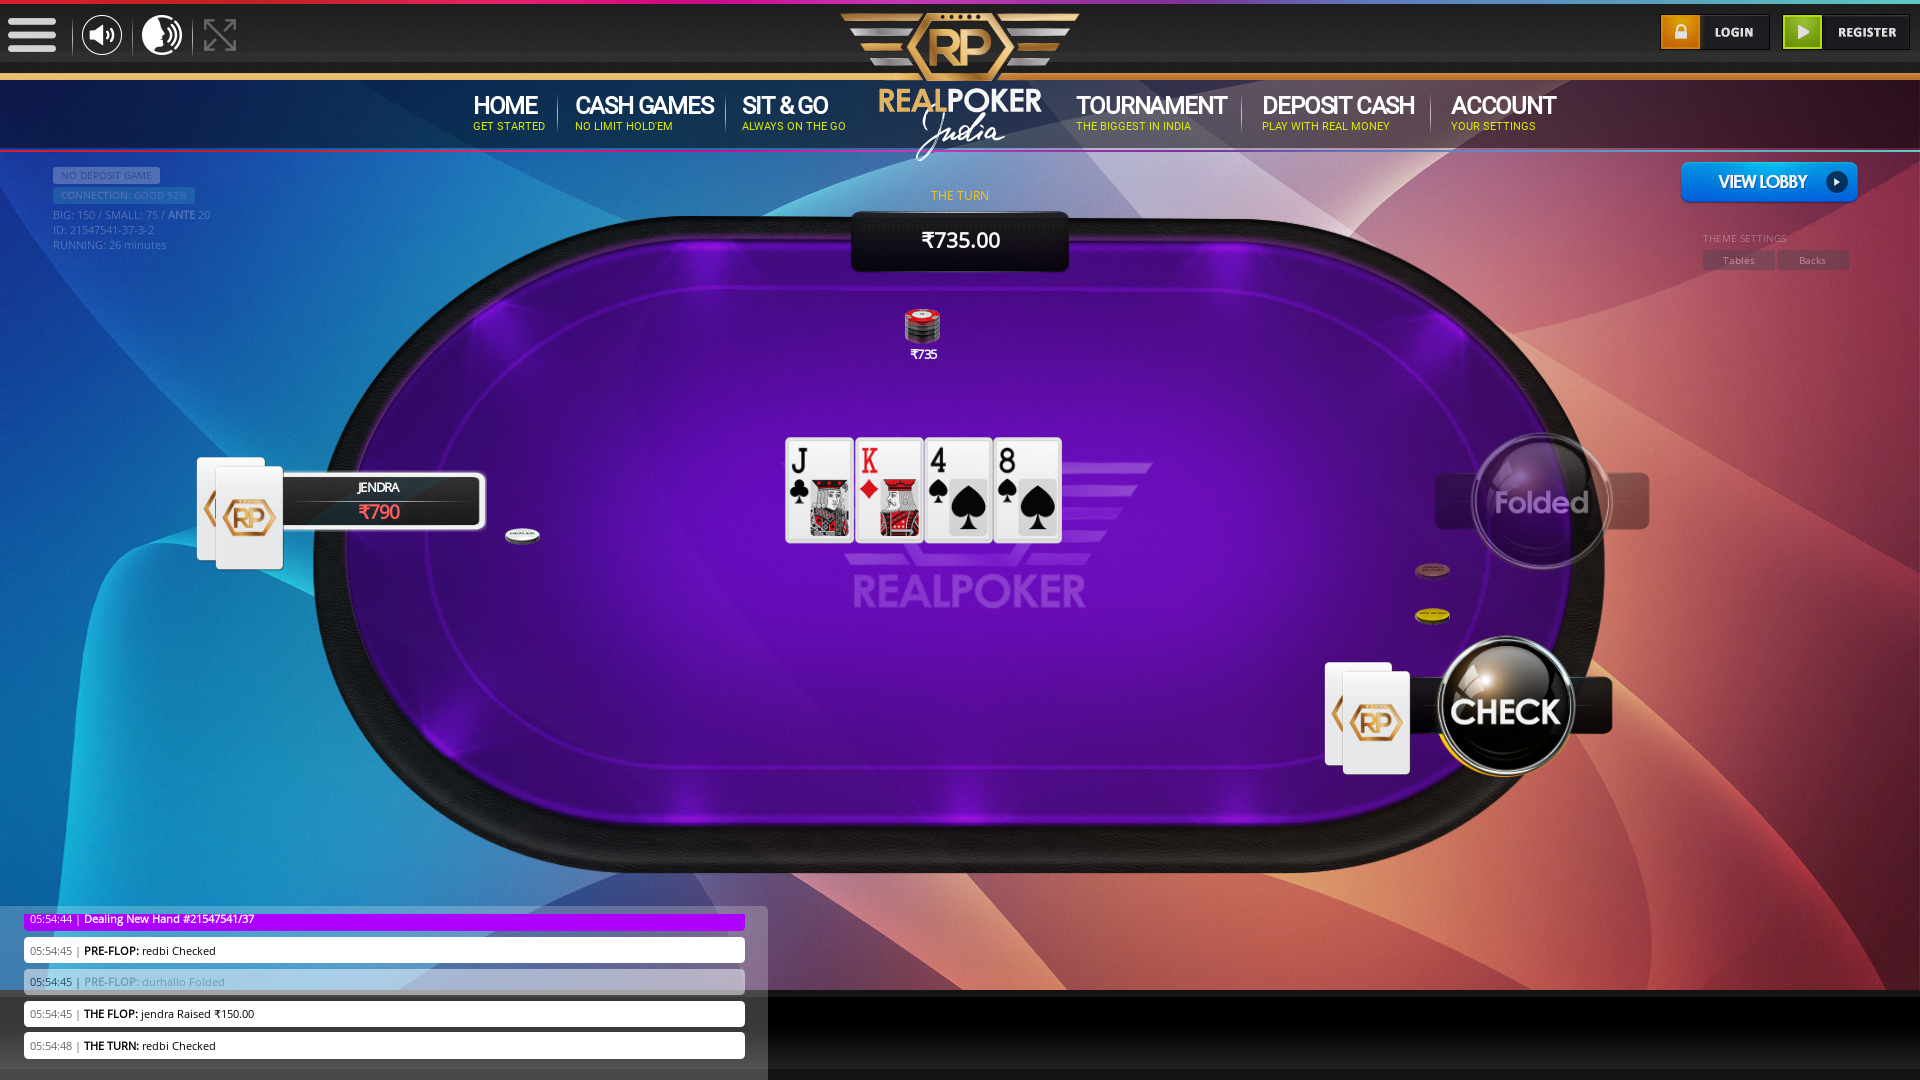 Alipore, Kolkata online poker game on a 10 player table in the 26th minute of the game